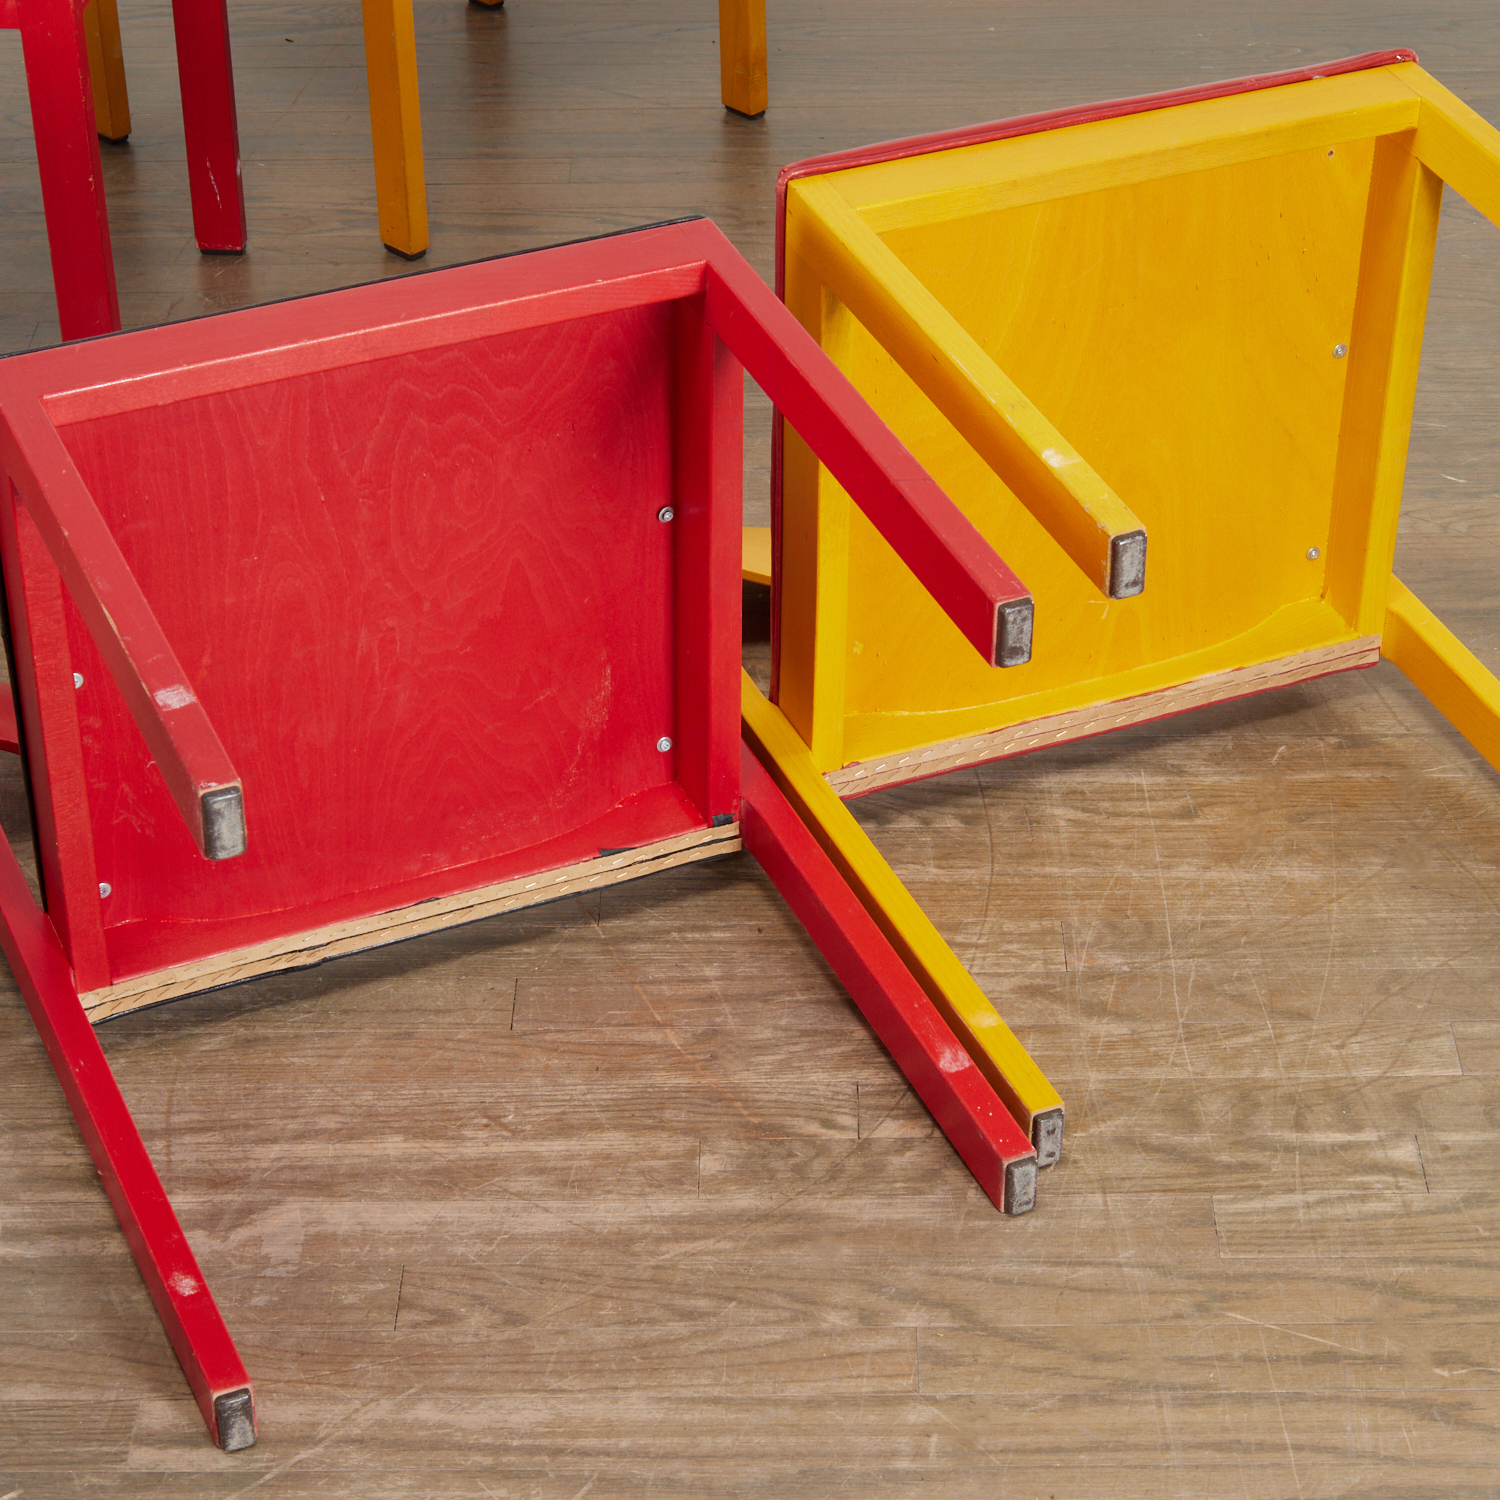 Rainer Schell, (6) colorful stacking chairs